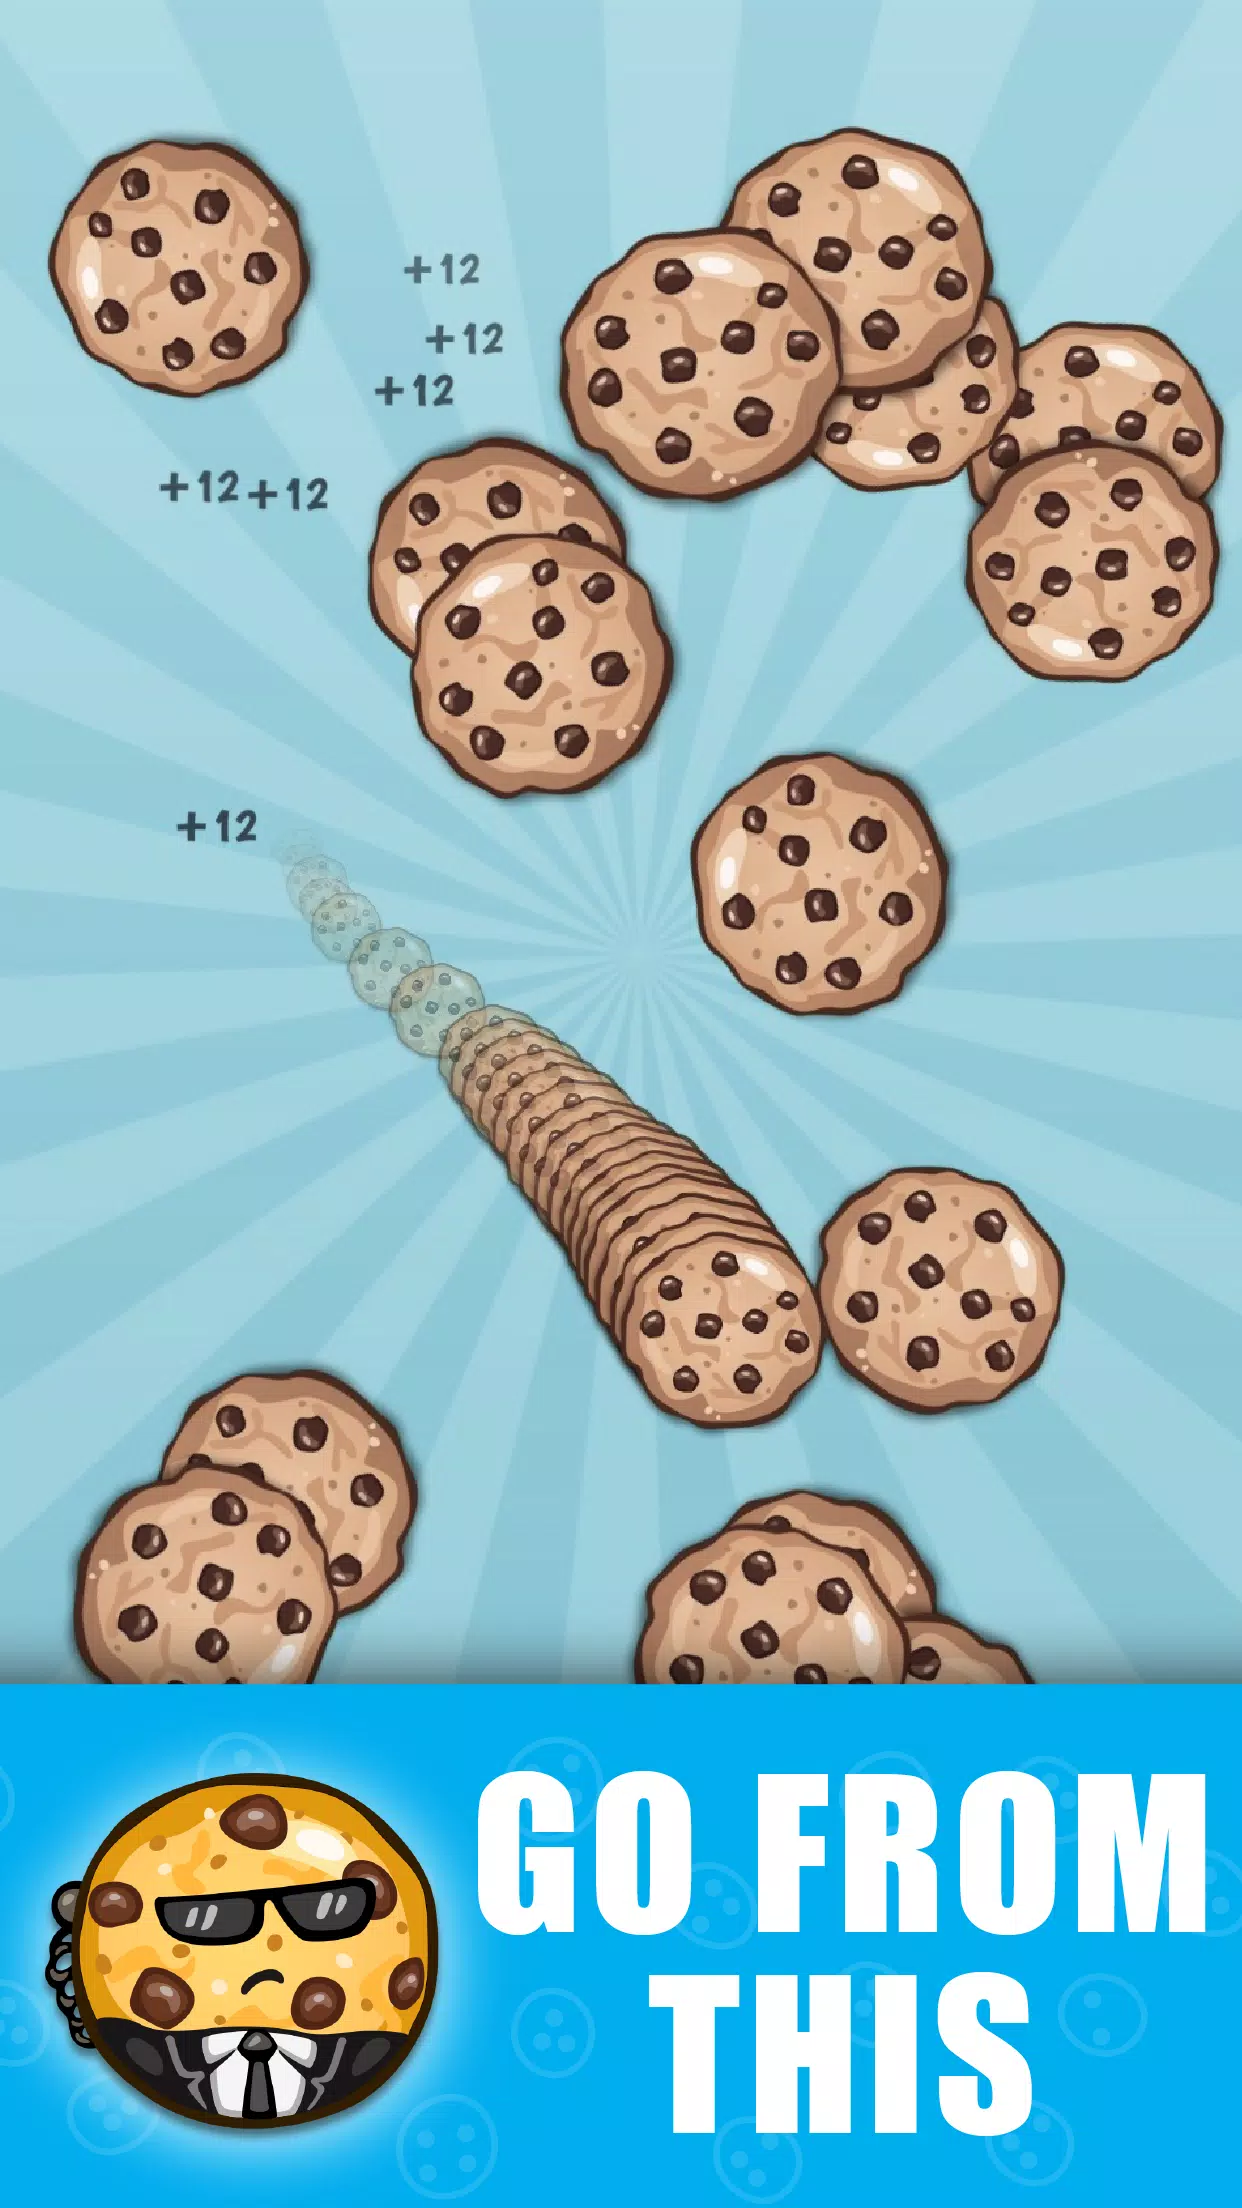 Cookie Clicker Android